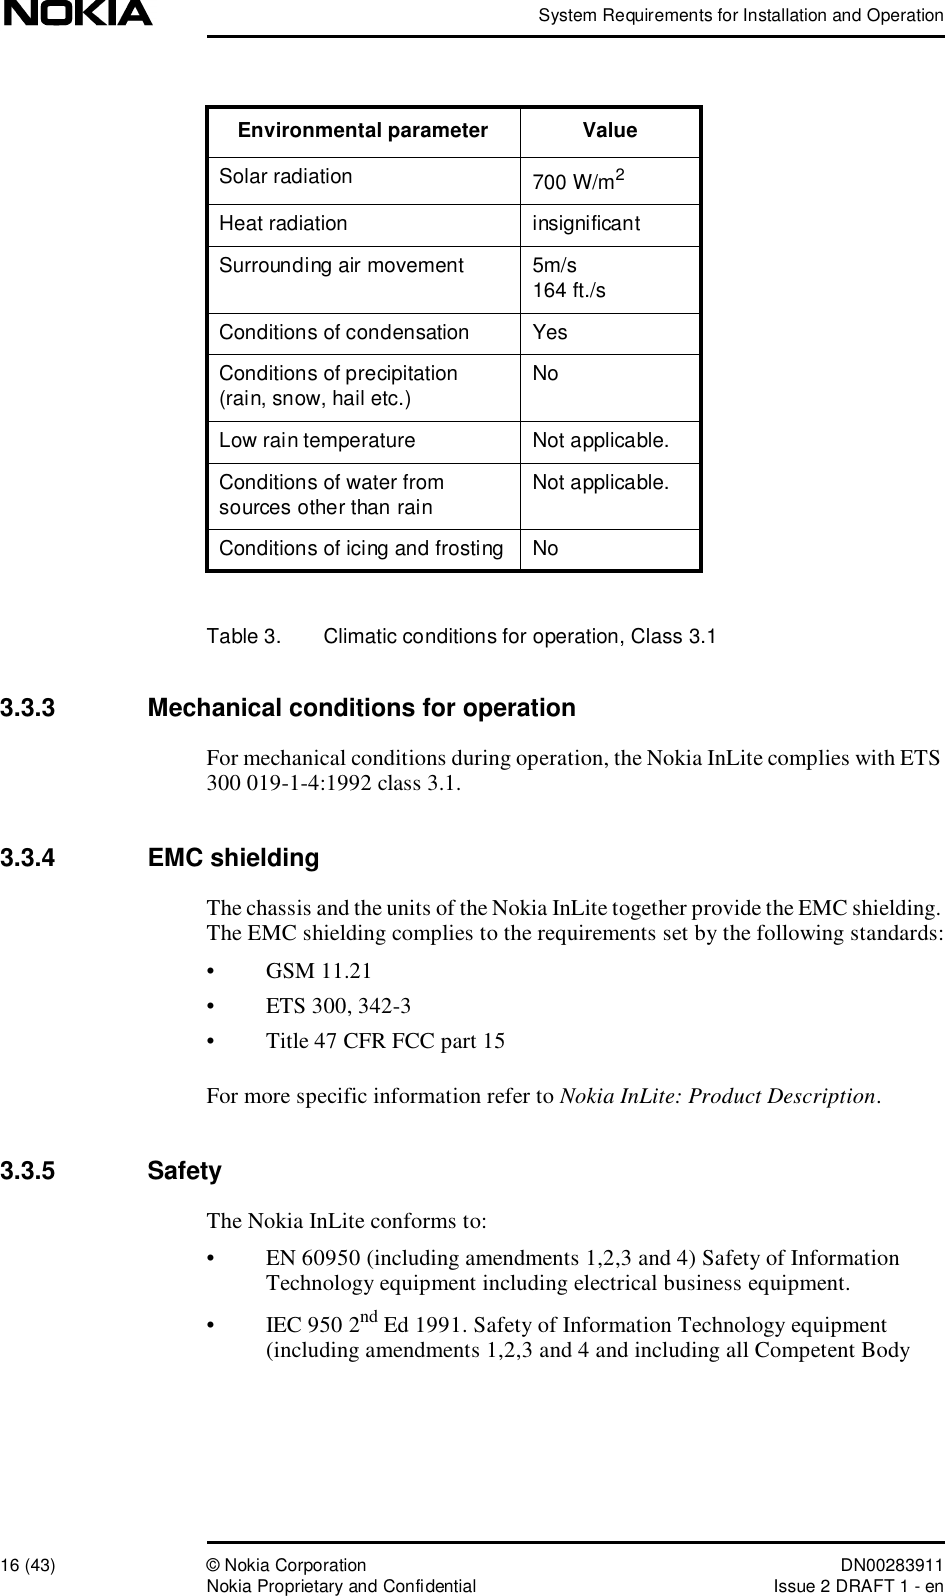 System Requirements for Installation and Operation16 (43)© Nokia Corporation DN00283911Nokia Proprietary and ConfidentialIssue 2 DRAFT 1 - enTable 3.  Climatic conditions for operation, Class 3.13.3.3  Mechanical conditions for operationFor mechanical conditions during operation, the Nokia InLite complies with ETS 300 019-1-4:1992 class 3.1.3.3.4  EMC shieldingThe chassis and the units of the Nokia InLite together provide the EMC shielding. The EMC shielding complies to the requirements set by the following standards:•GSM 11.21•ETS 300, 342-3•Title 47 CFR FCC part 15For more specific information refer to Nokia InLite: Product Description.3.3.5  SafetyThe Nokia InLite conforms to:•EN 60950 (including amendments 1,2,3 and 4) Safety of Information Technology equipment including electrical business equipment.•IEC 950 2nd Ed 1991. Safety of Information Technology equipment (including amendments 1,2,3 and 4 and including all Competent Body Solar radiation 700 W/m2Heat radiation insignificantSurrounding air movement5m/s164 ft./sConditions of condensation YesConditions of precipitation (rain, snow, hail etc.) NoLow rain temperatureNot applicable.Conditions of water from sources other than rain Not applicable.Conditions of icing and frostingNoEnvironmental parameter Value